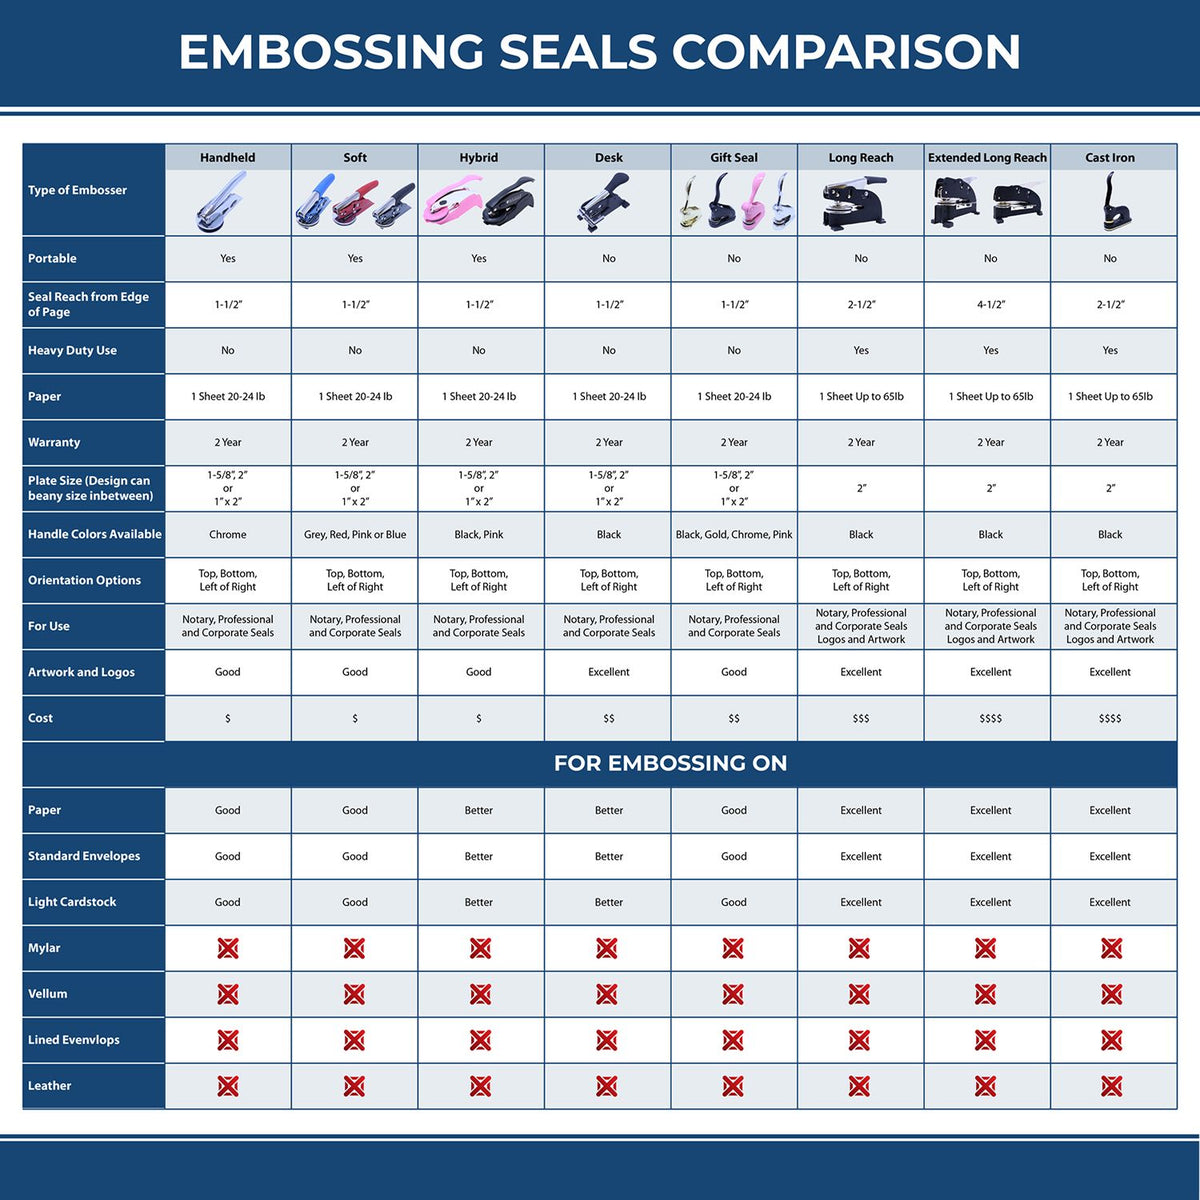 A comparison chart for the different types of mount models available for the Extended Long Reach Maryland Architect Seal Embosser.